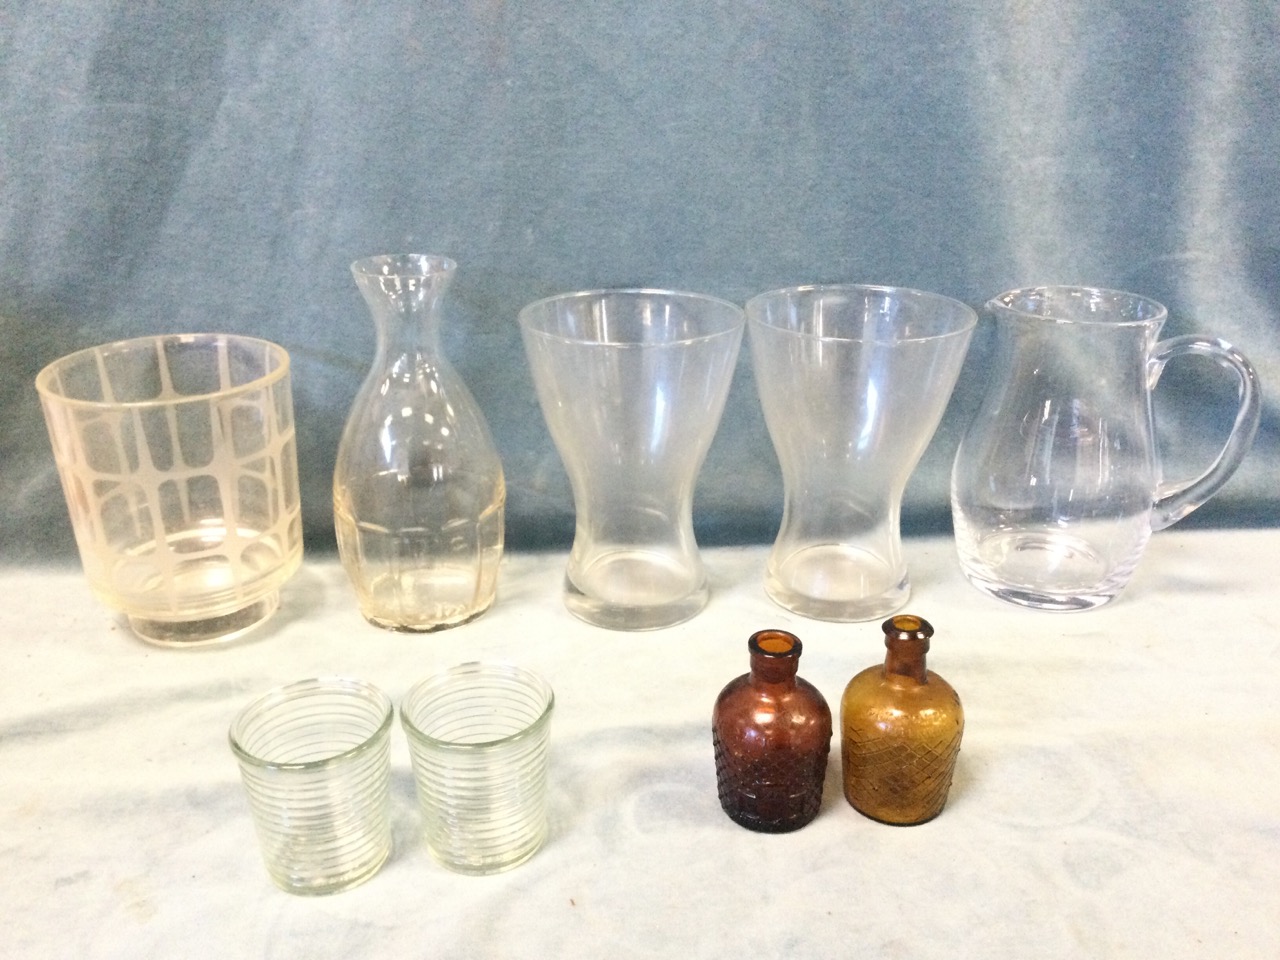 Miscellaneous glass - vases, a wine cooler, a water jug, sets of wine glasses, etc. (A lot) - Image 3 of 3